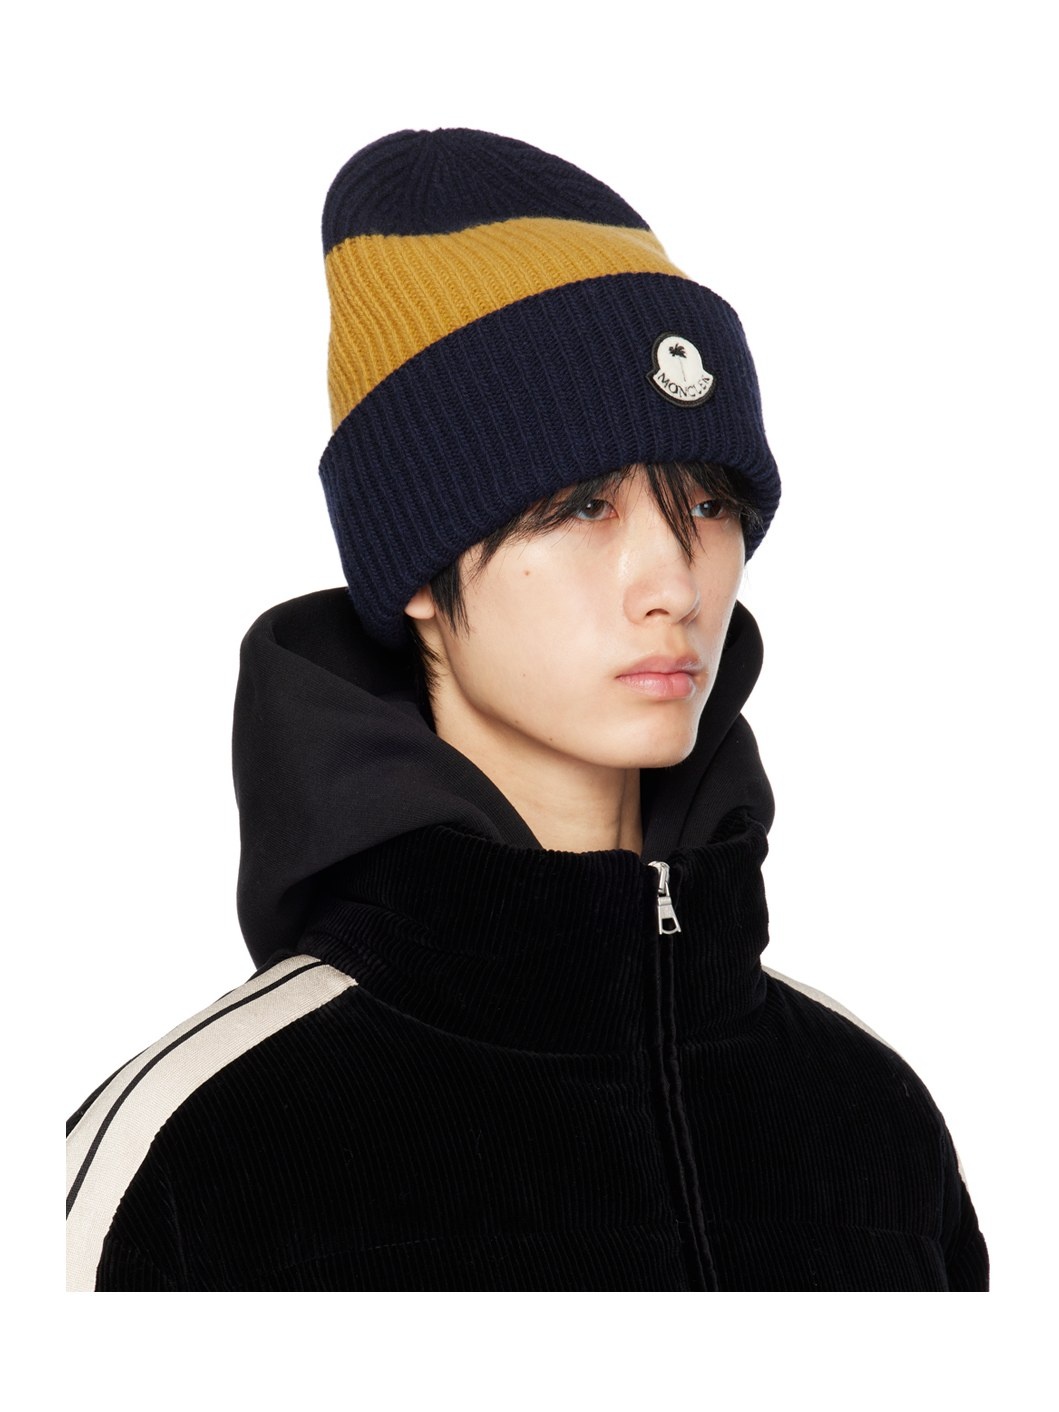 Moncler x Palm Angels Navy & Yellow Beanie - 2